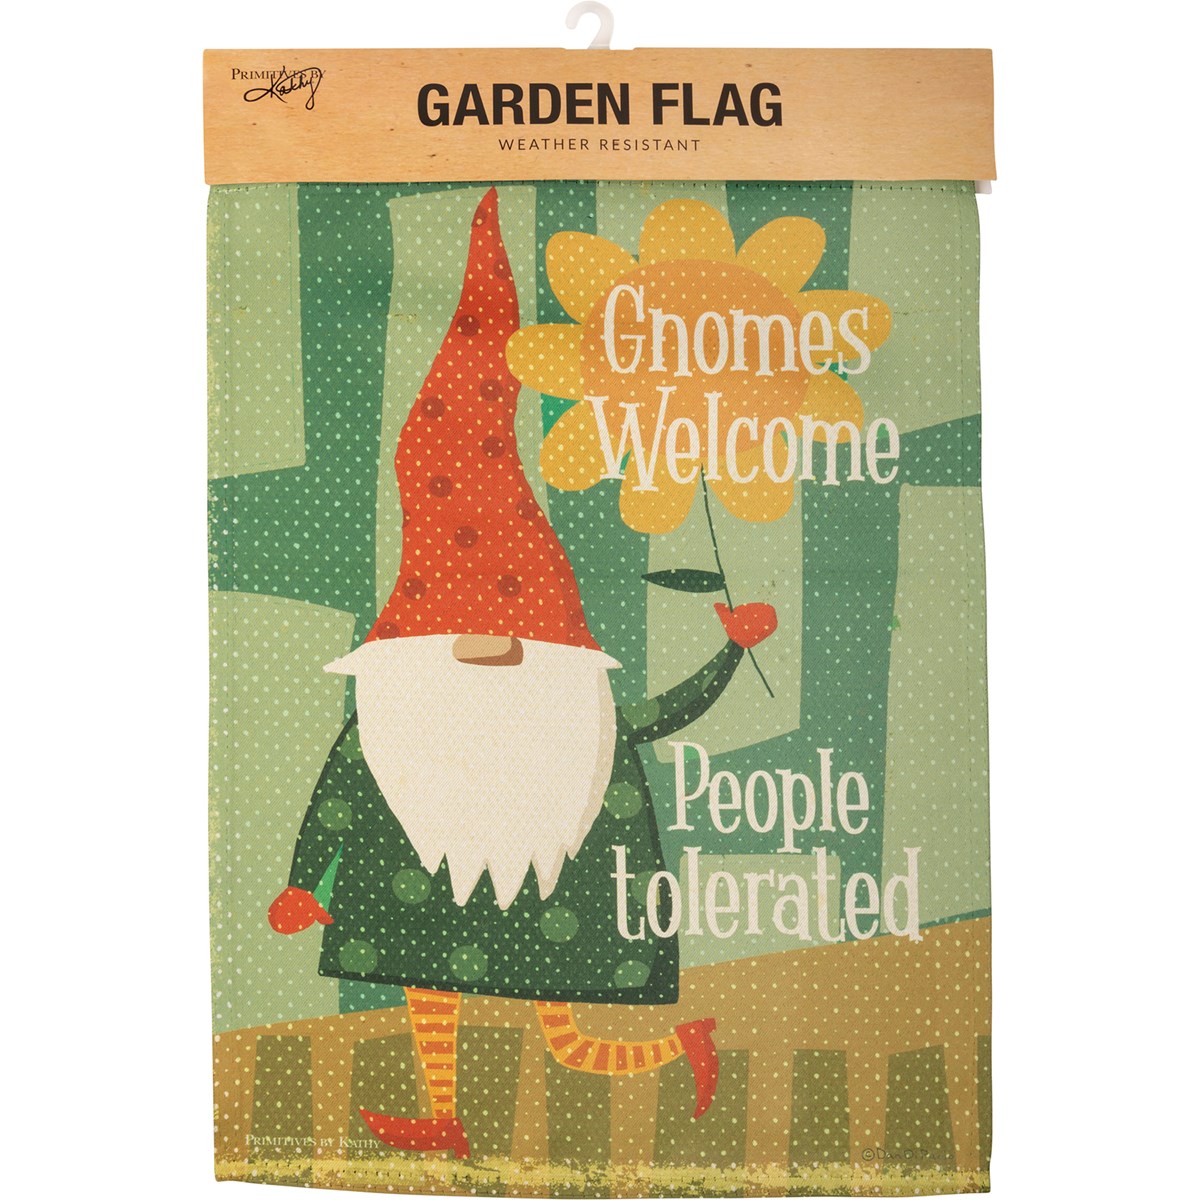 Gnomes Welcome People Tolerated Garden Flag - Polyester